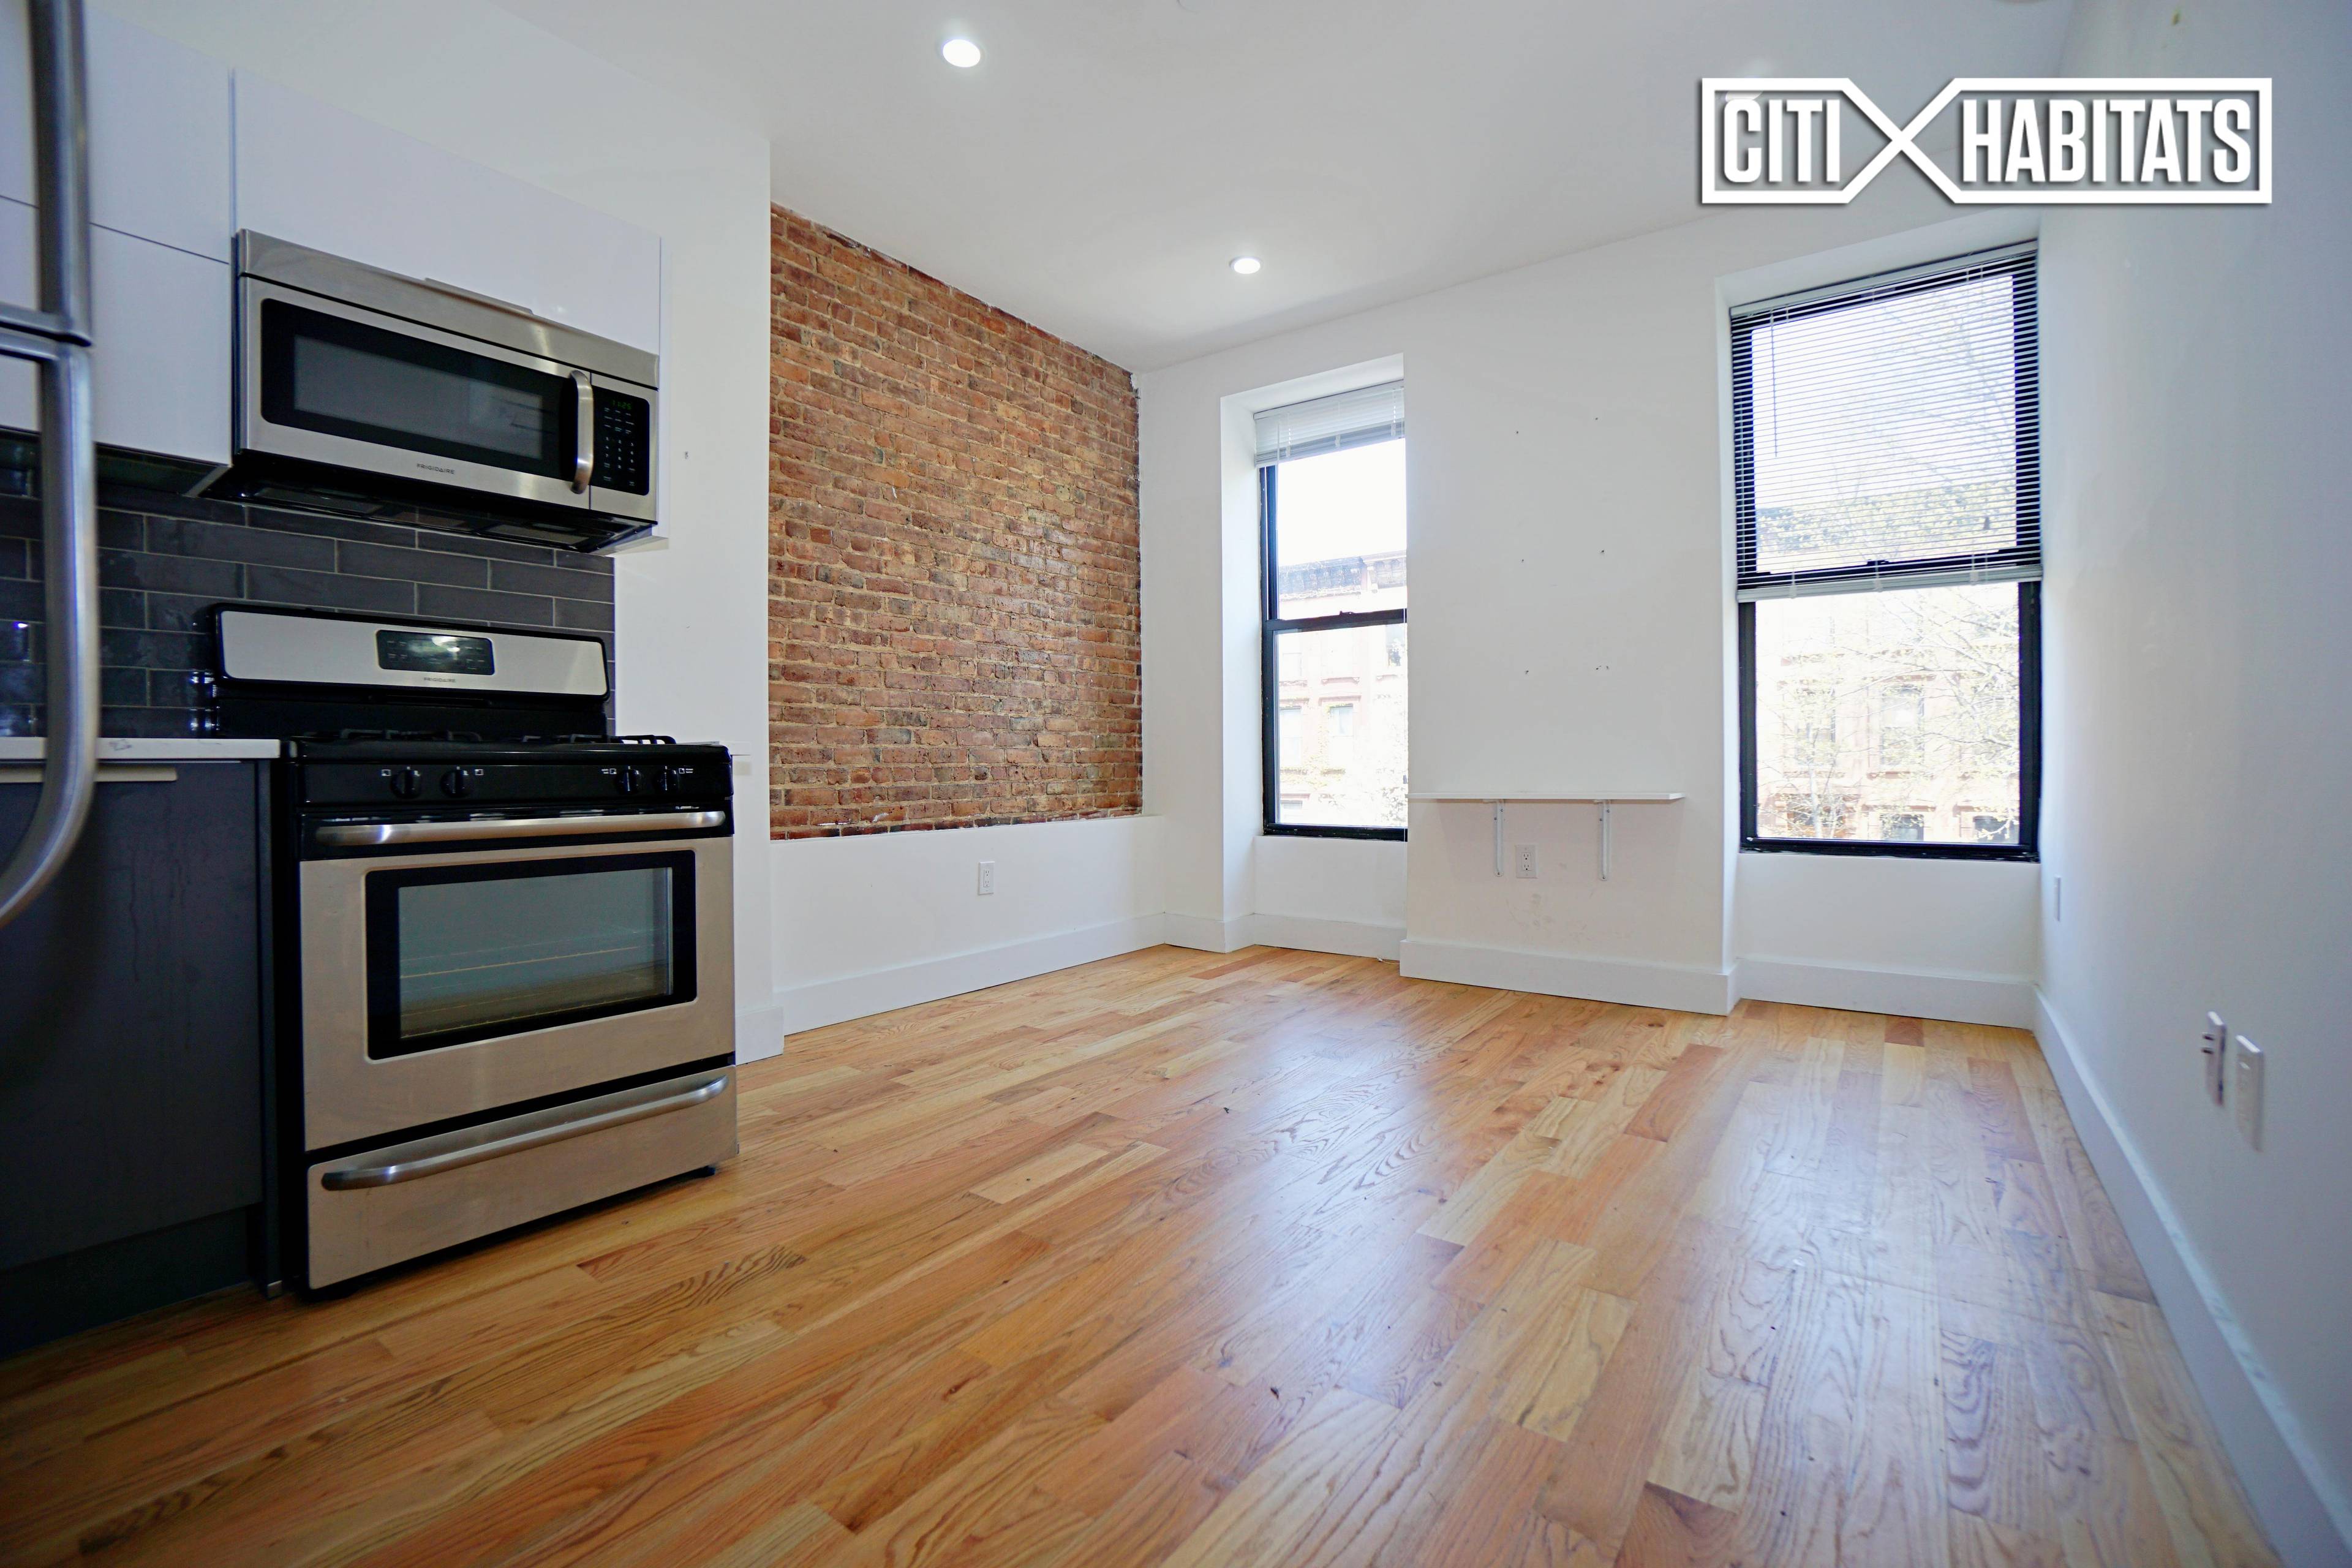 Brand New Cozy Studio apartment with High End Finishes, Located few steps away from Fulton Street the LIRR and A, C Trains on Nostrand Ave, short walk to many Bars, ...